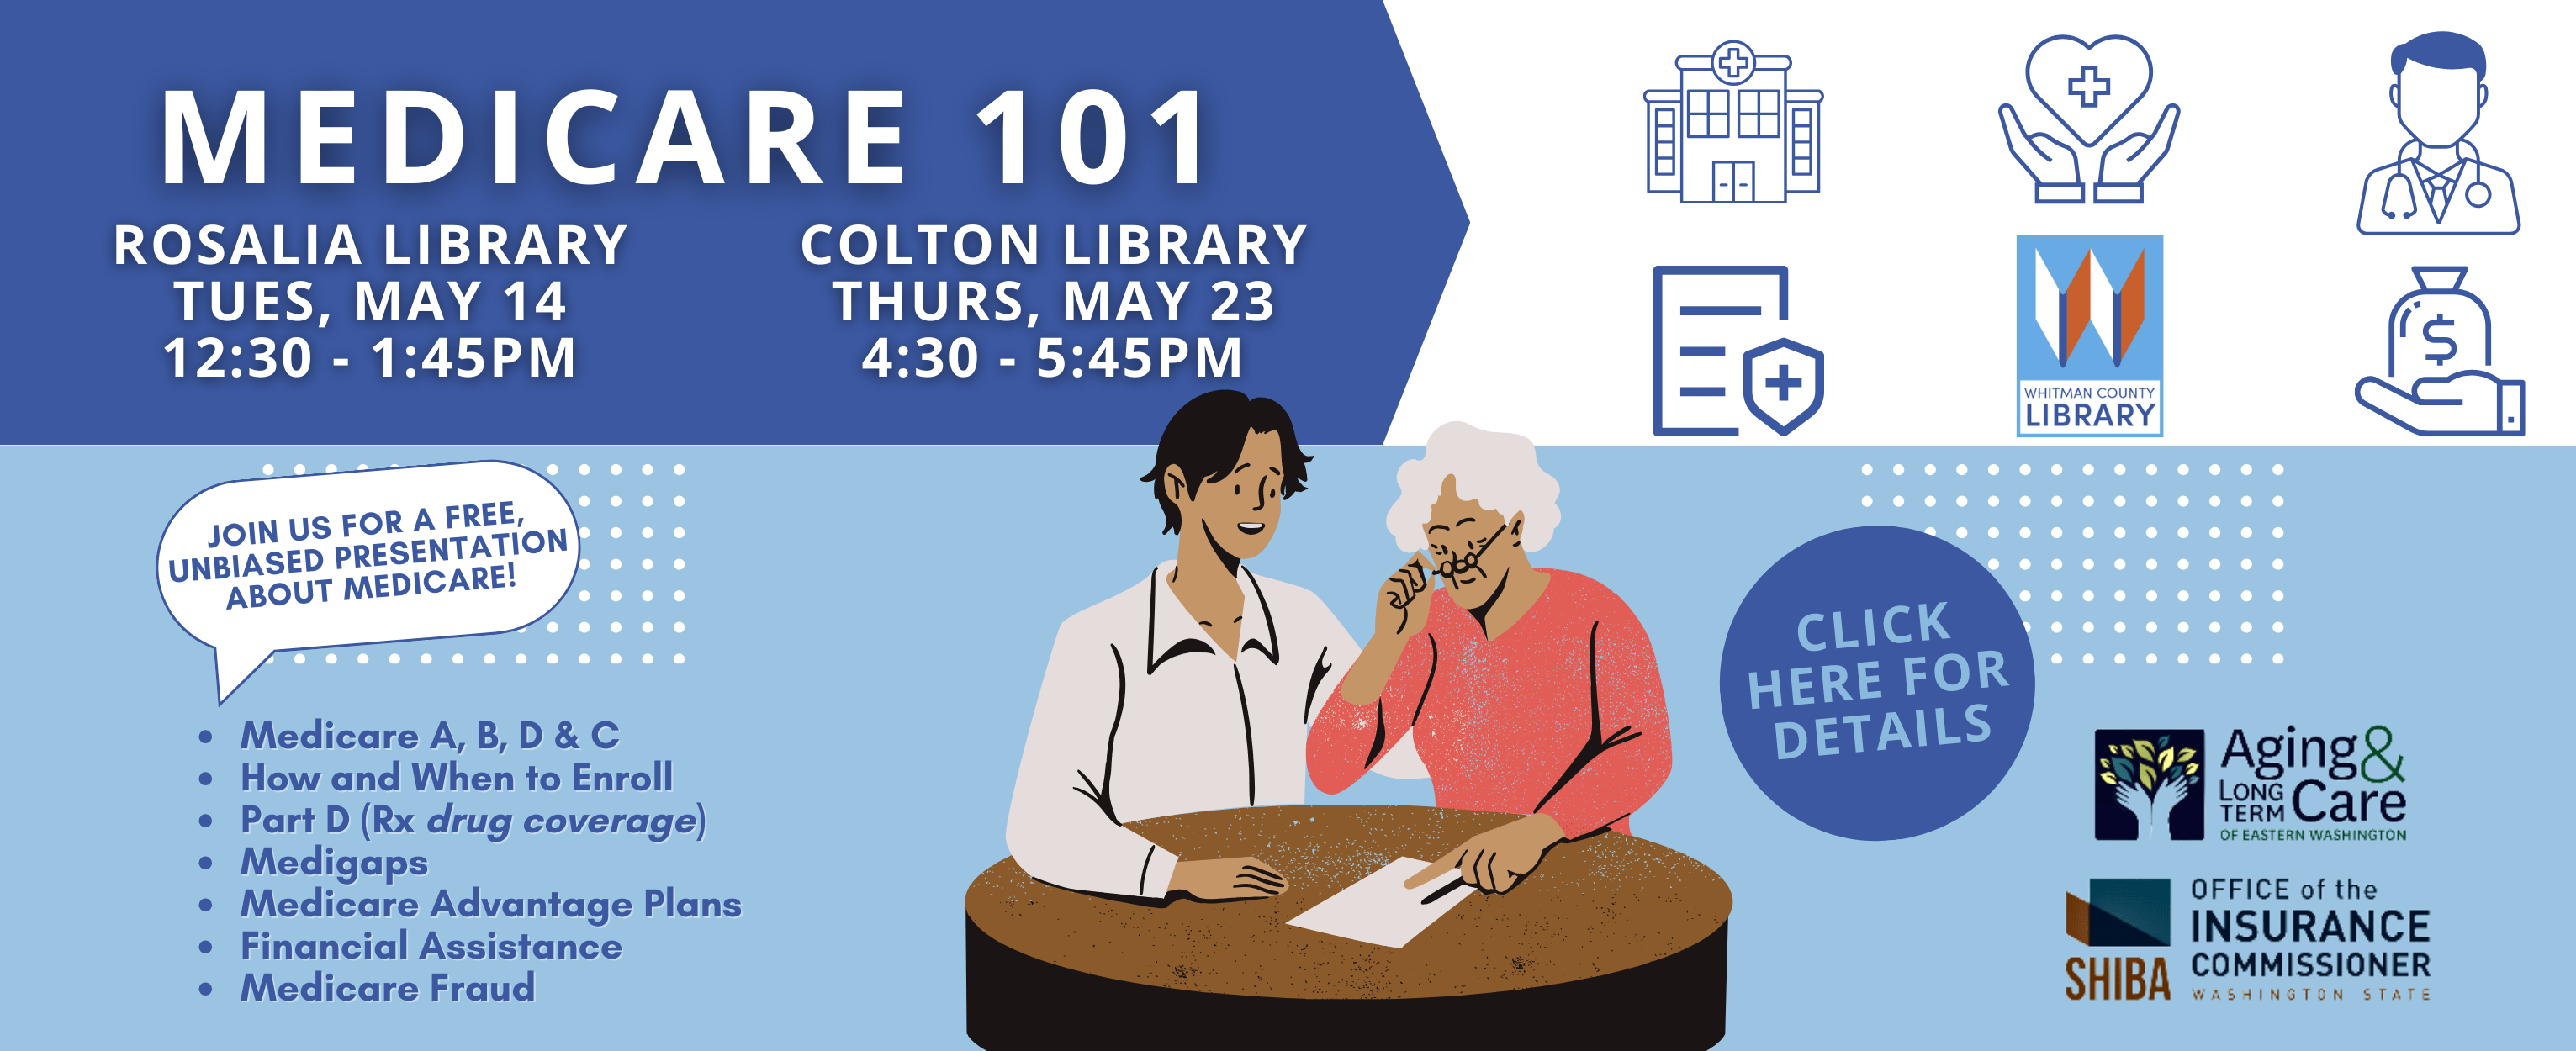 More Medicare learning opportunities are coming up with WCL! Click here for details about events at both the Rosalia and Colton Libraries in May.